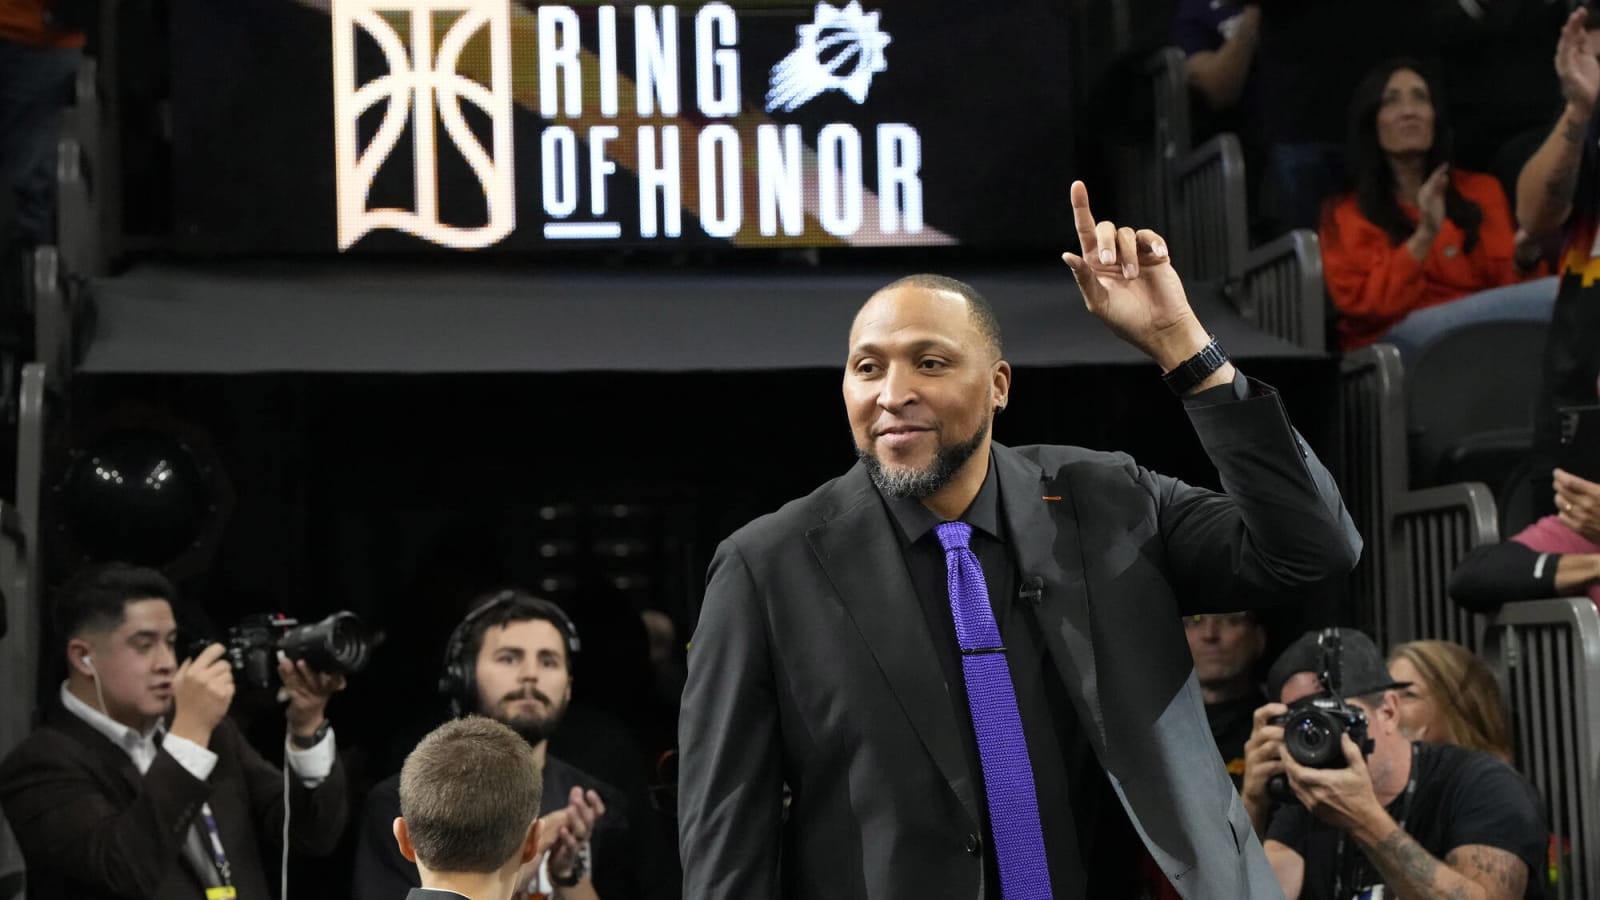 Shawn Marion Reflects on Suns Ring of Honor Induction